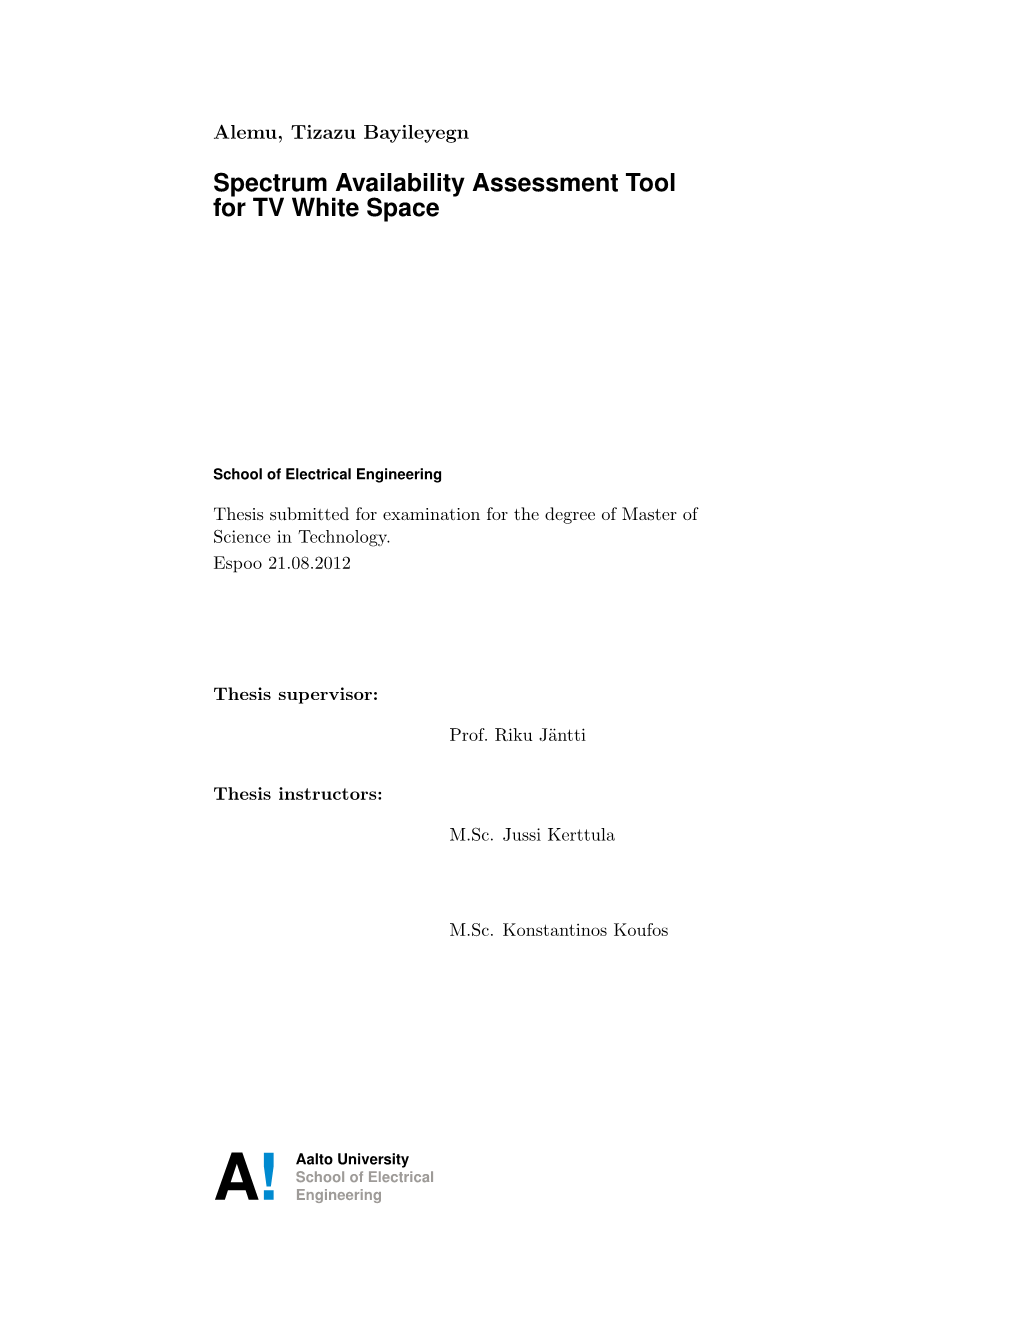 Spectrum Availability Assessment Tool for TV White Space